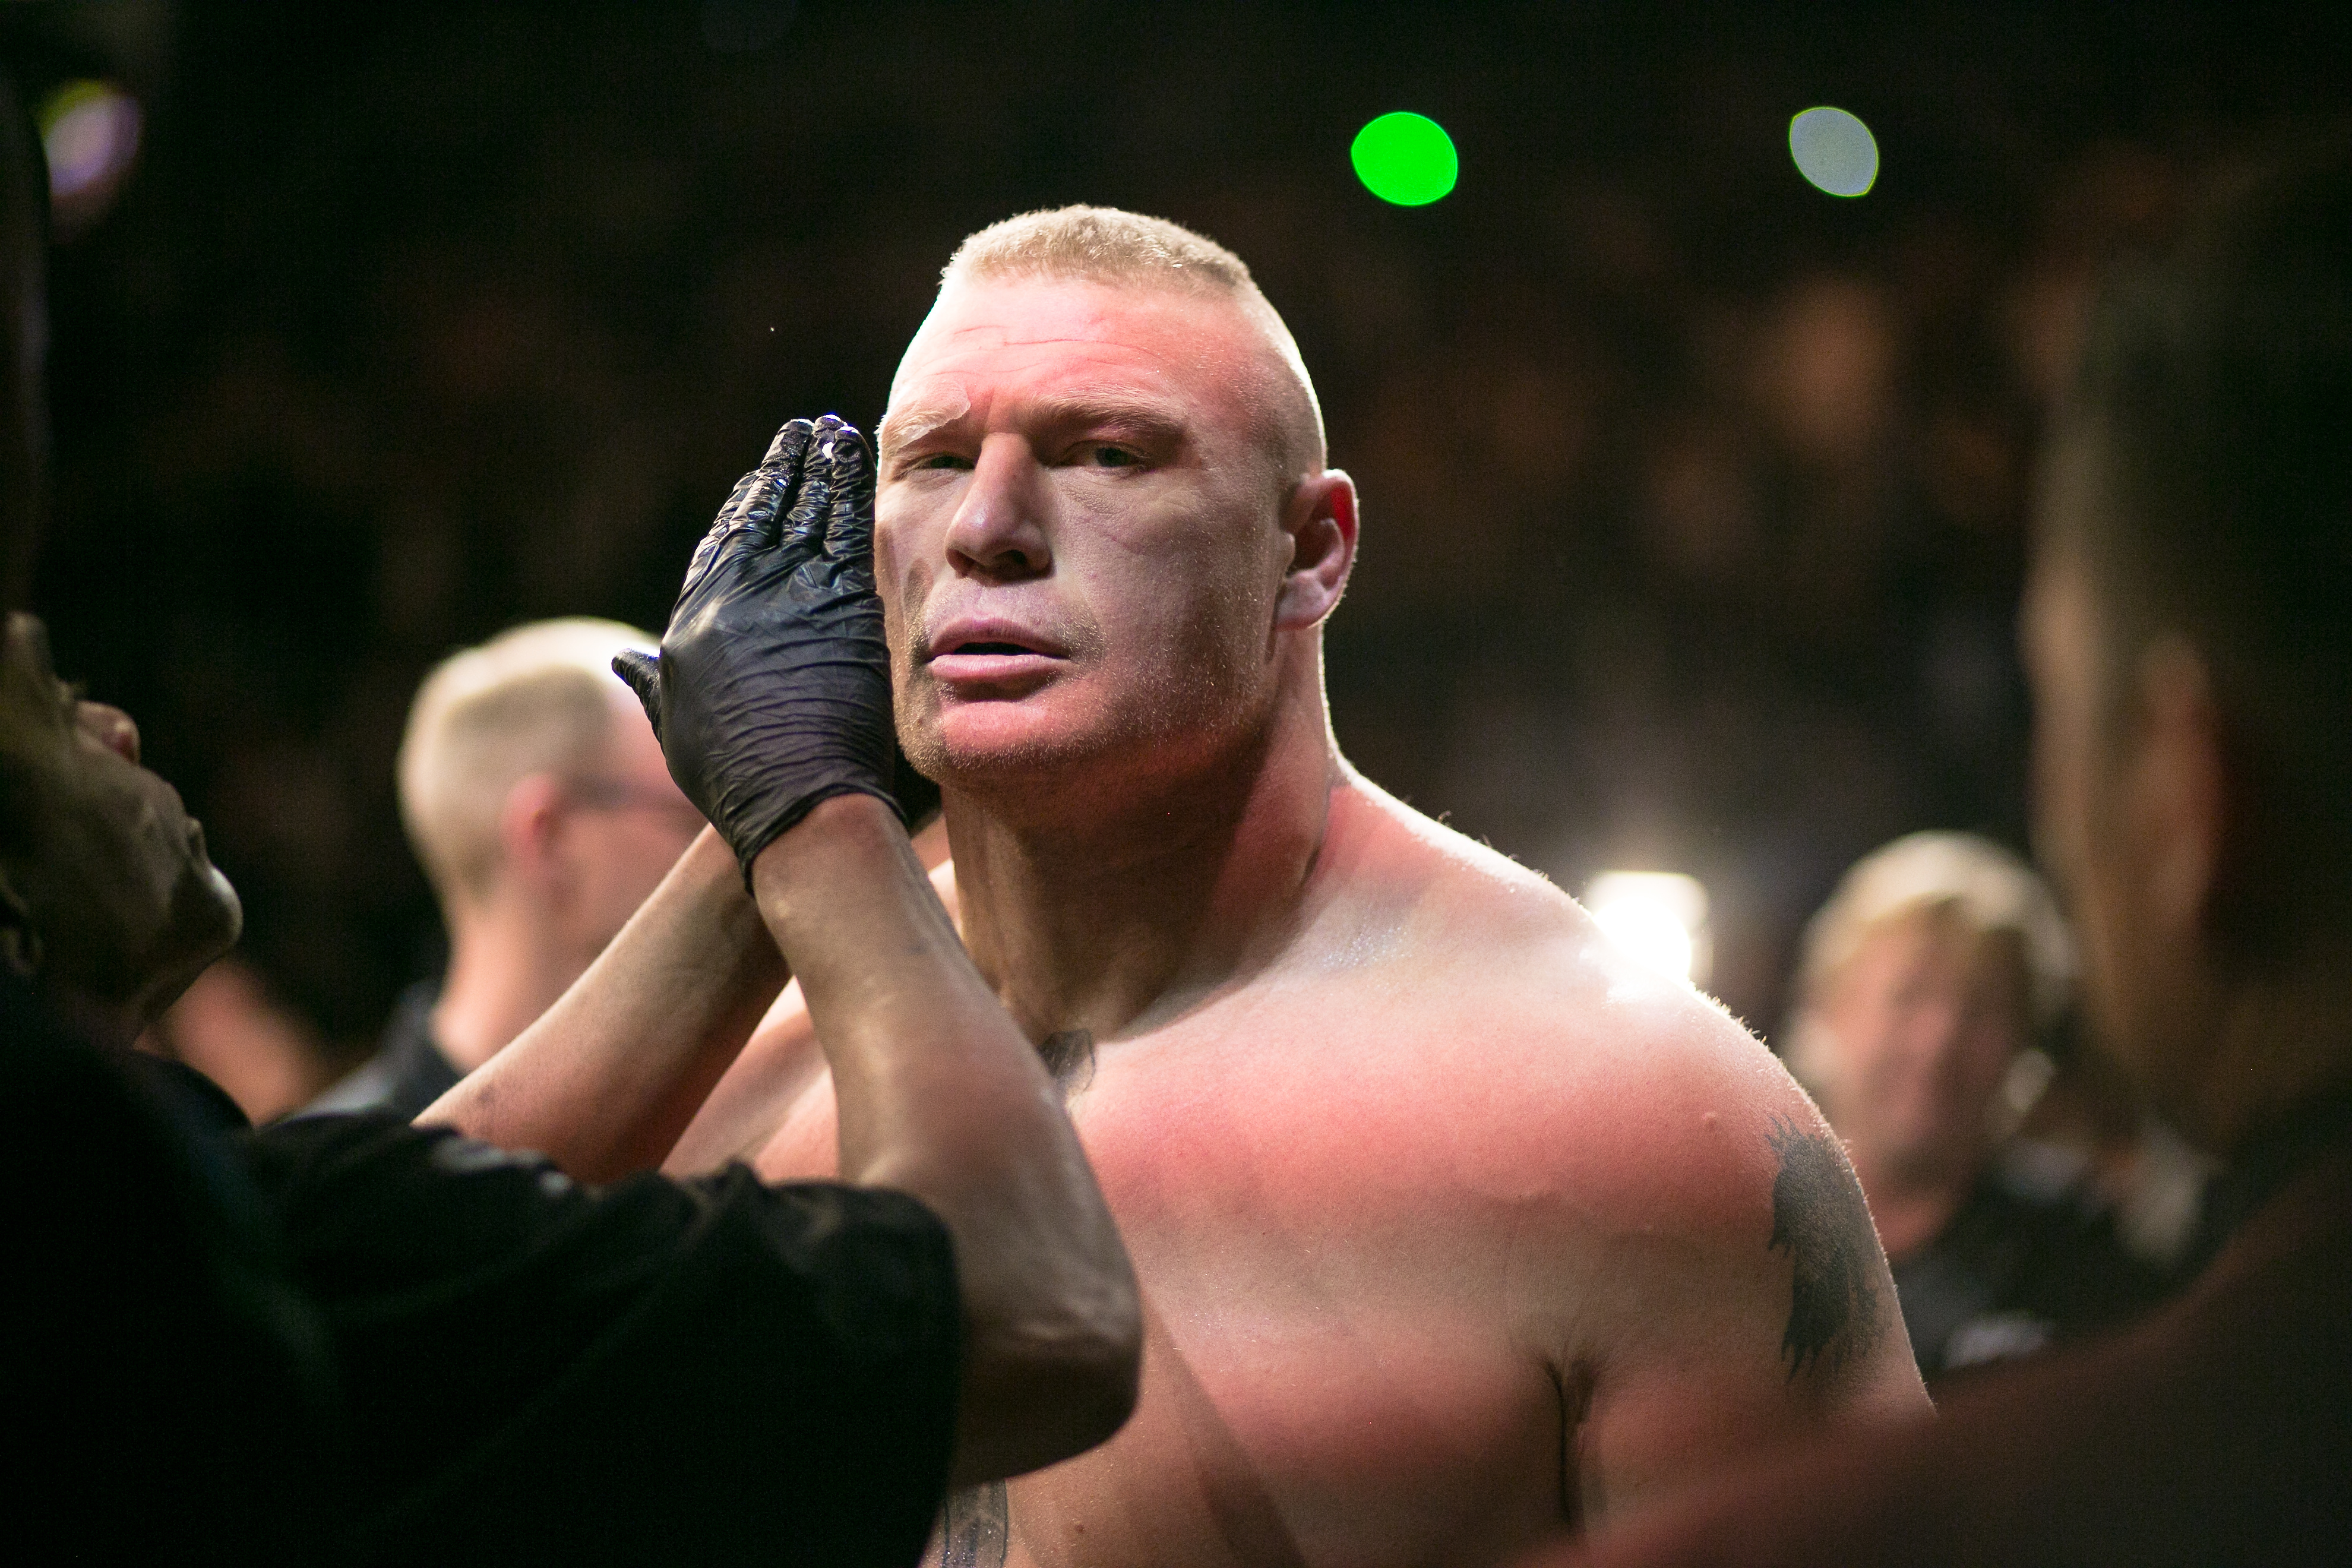 Brock Lesnar’s History of Illicit Substances, Broken Contracts, and Illegal Hunting Cost Him Millions